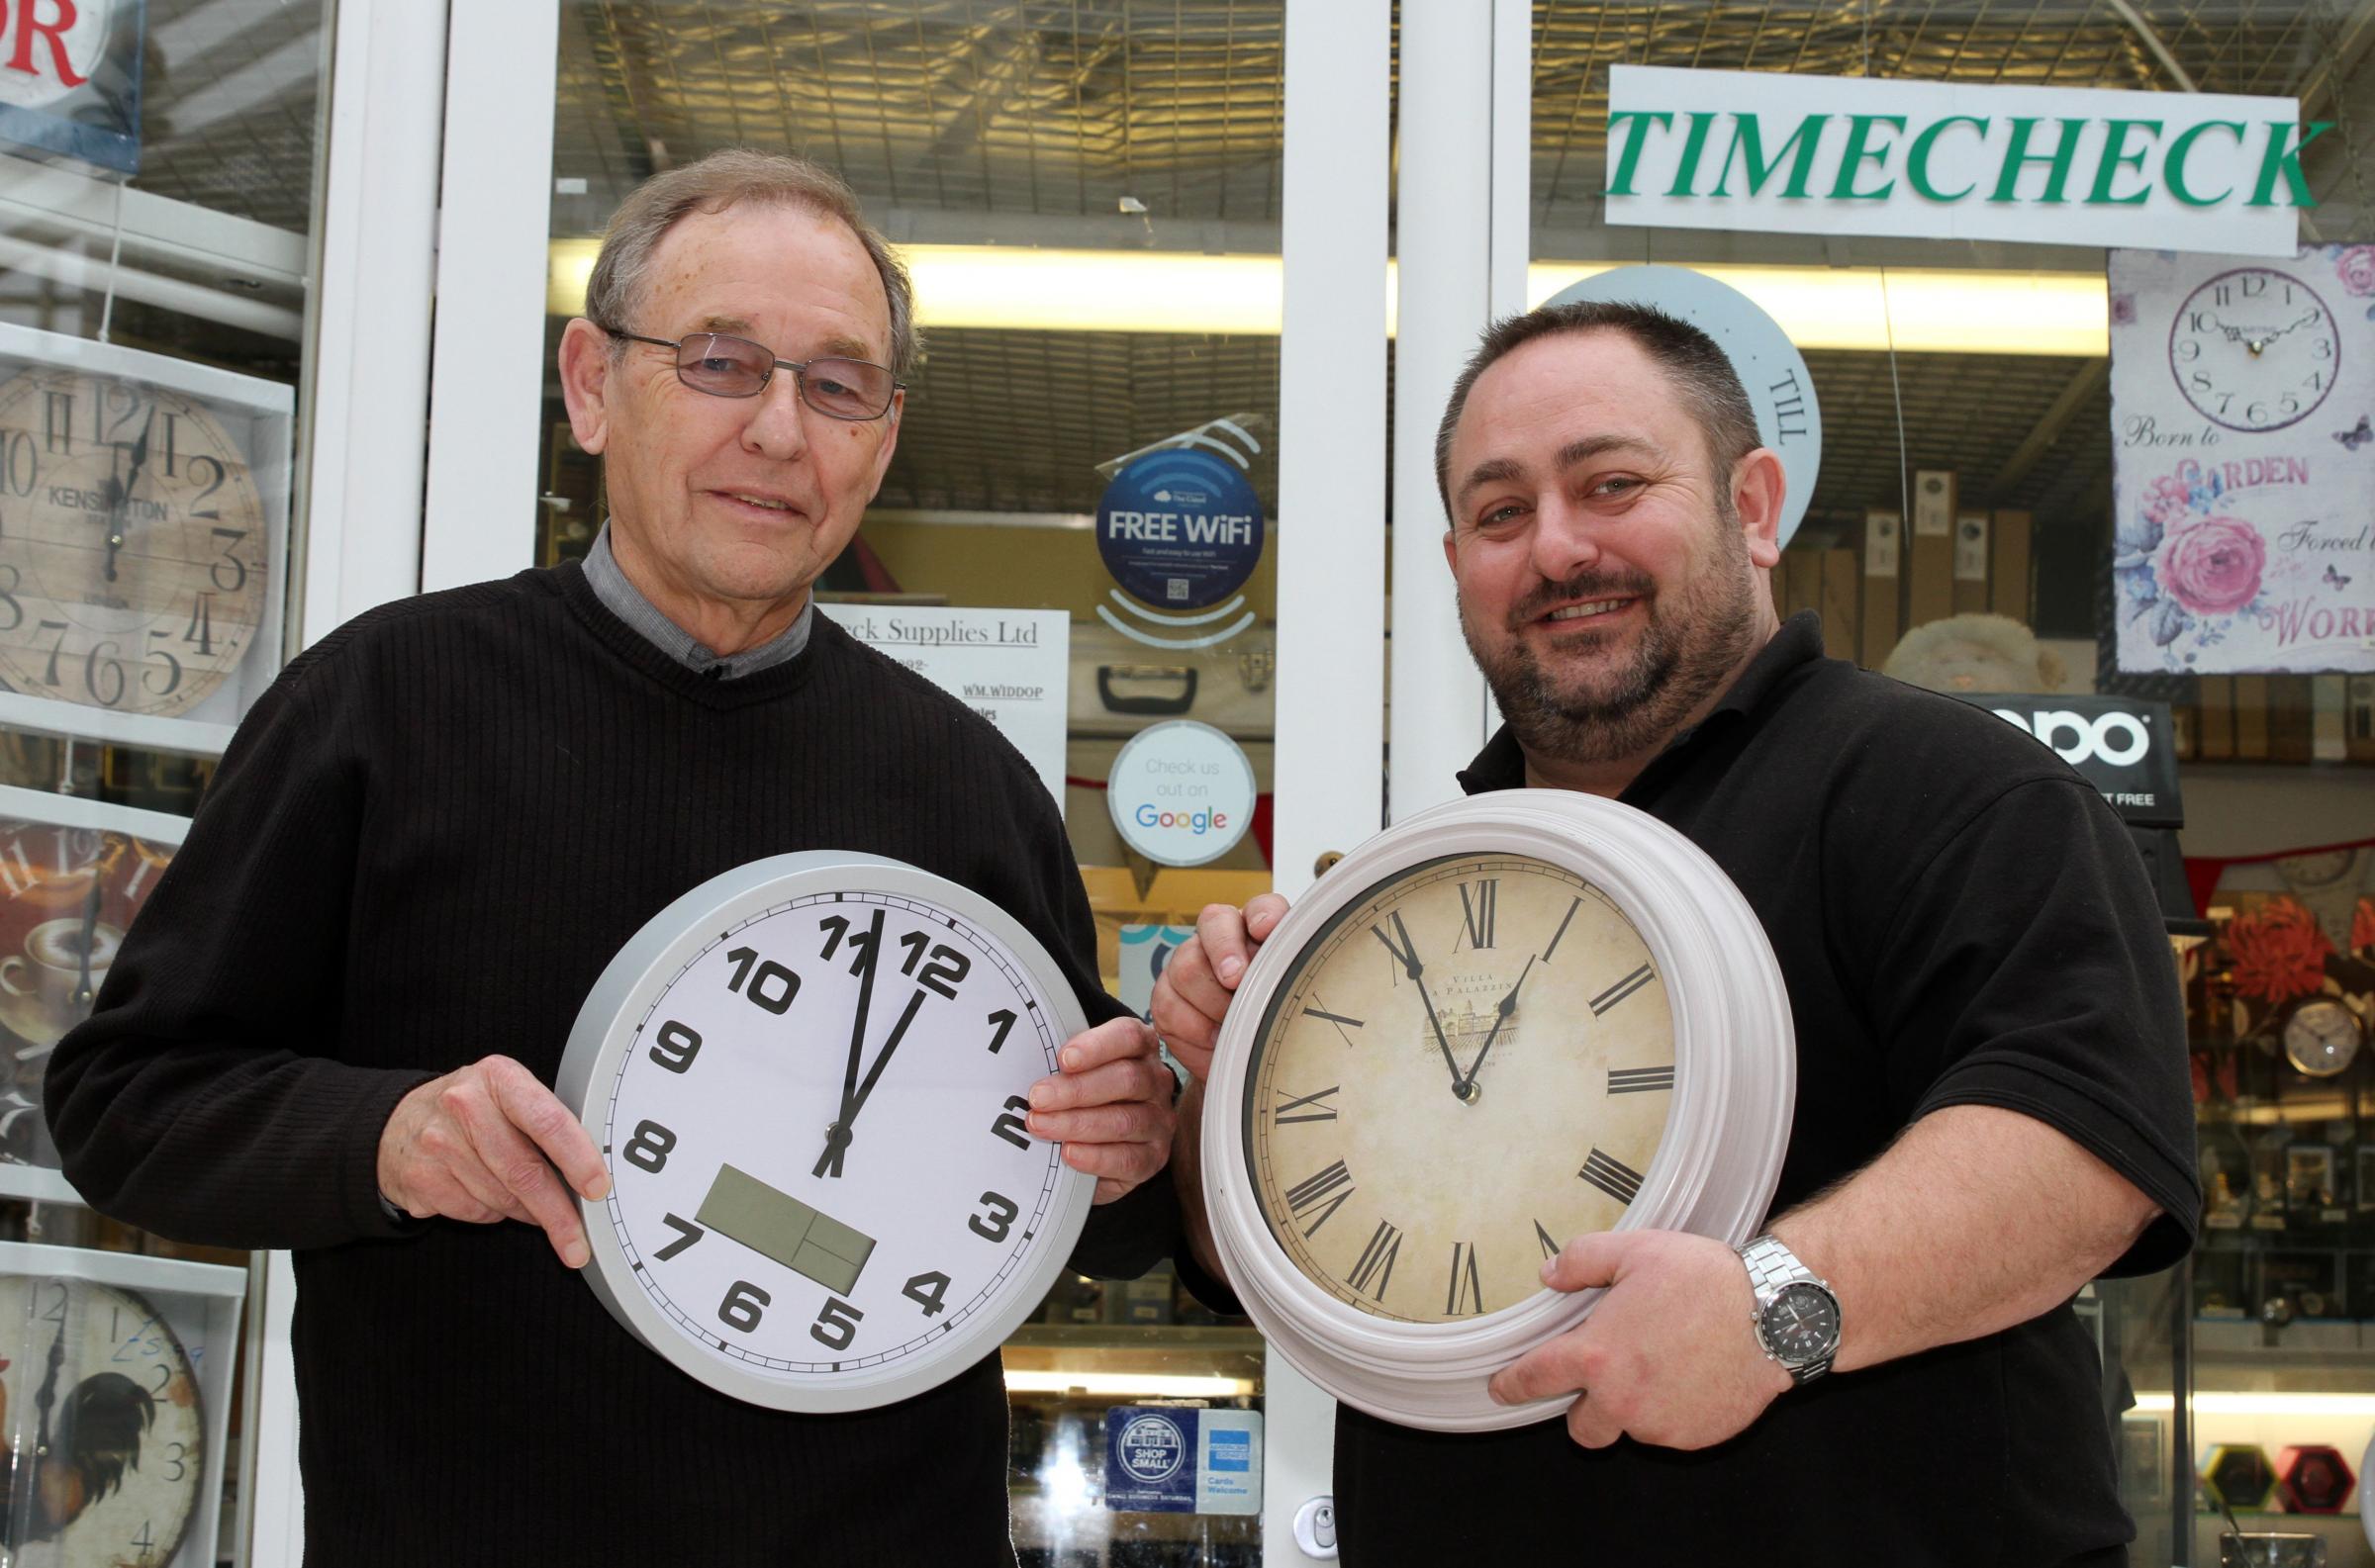 Clockmaker to turn back 300 watches and clocks - in time for official start of summer